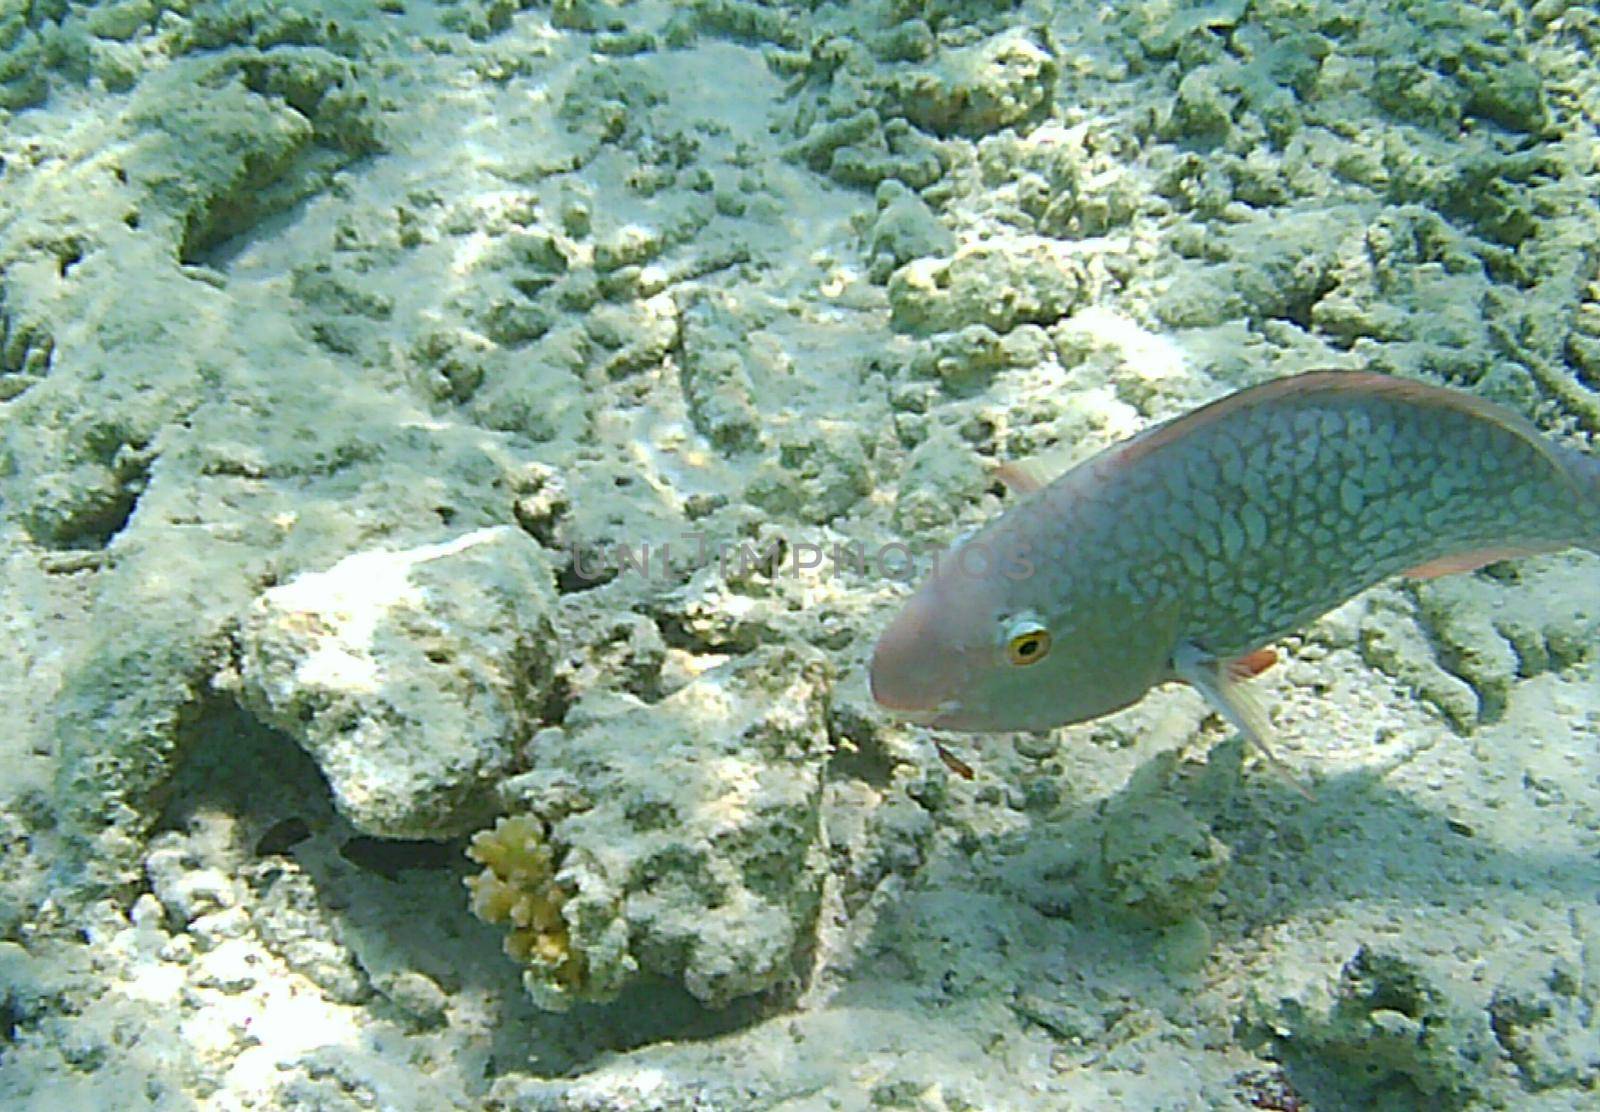 Fishes swim against the background of corals.